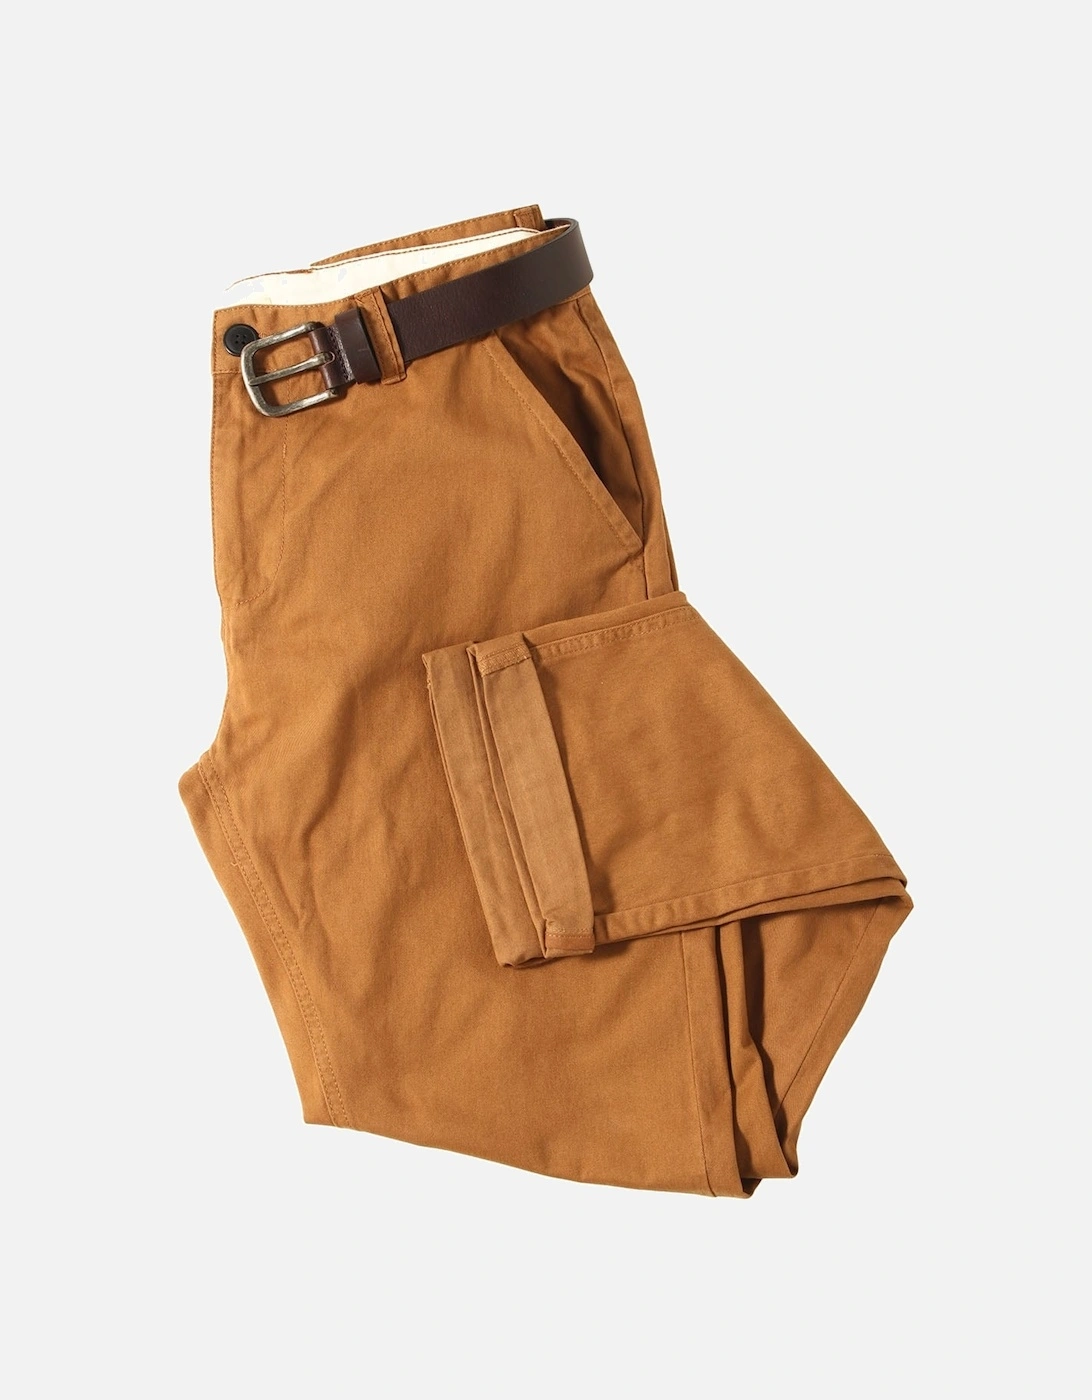 Melford Flat Fronted Cotton Chinos | Tobacco